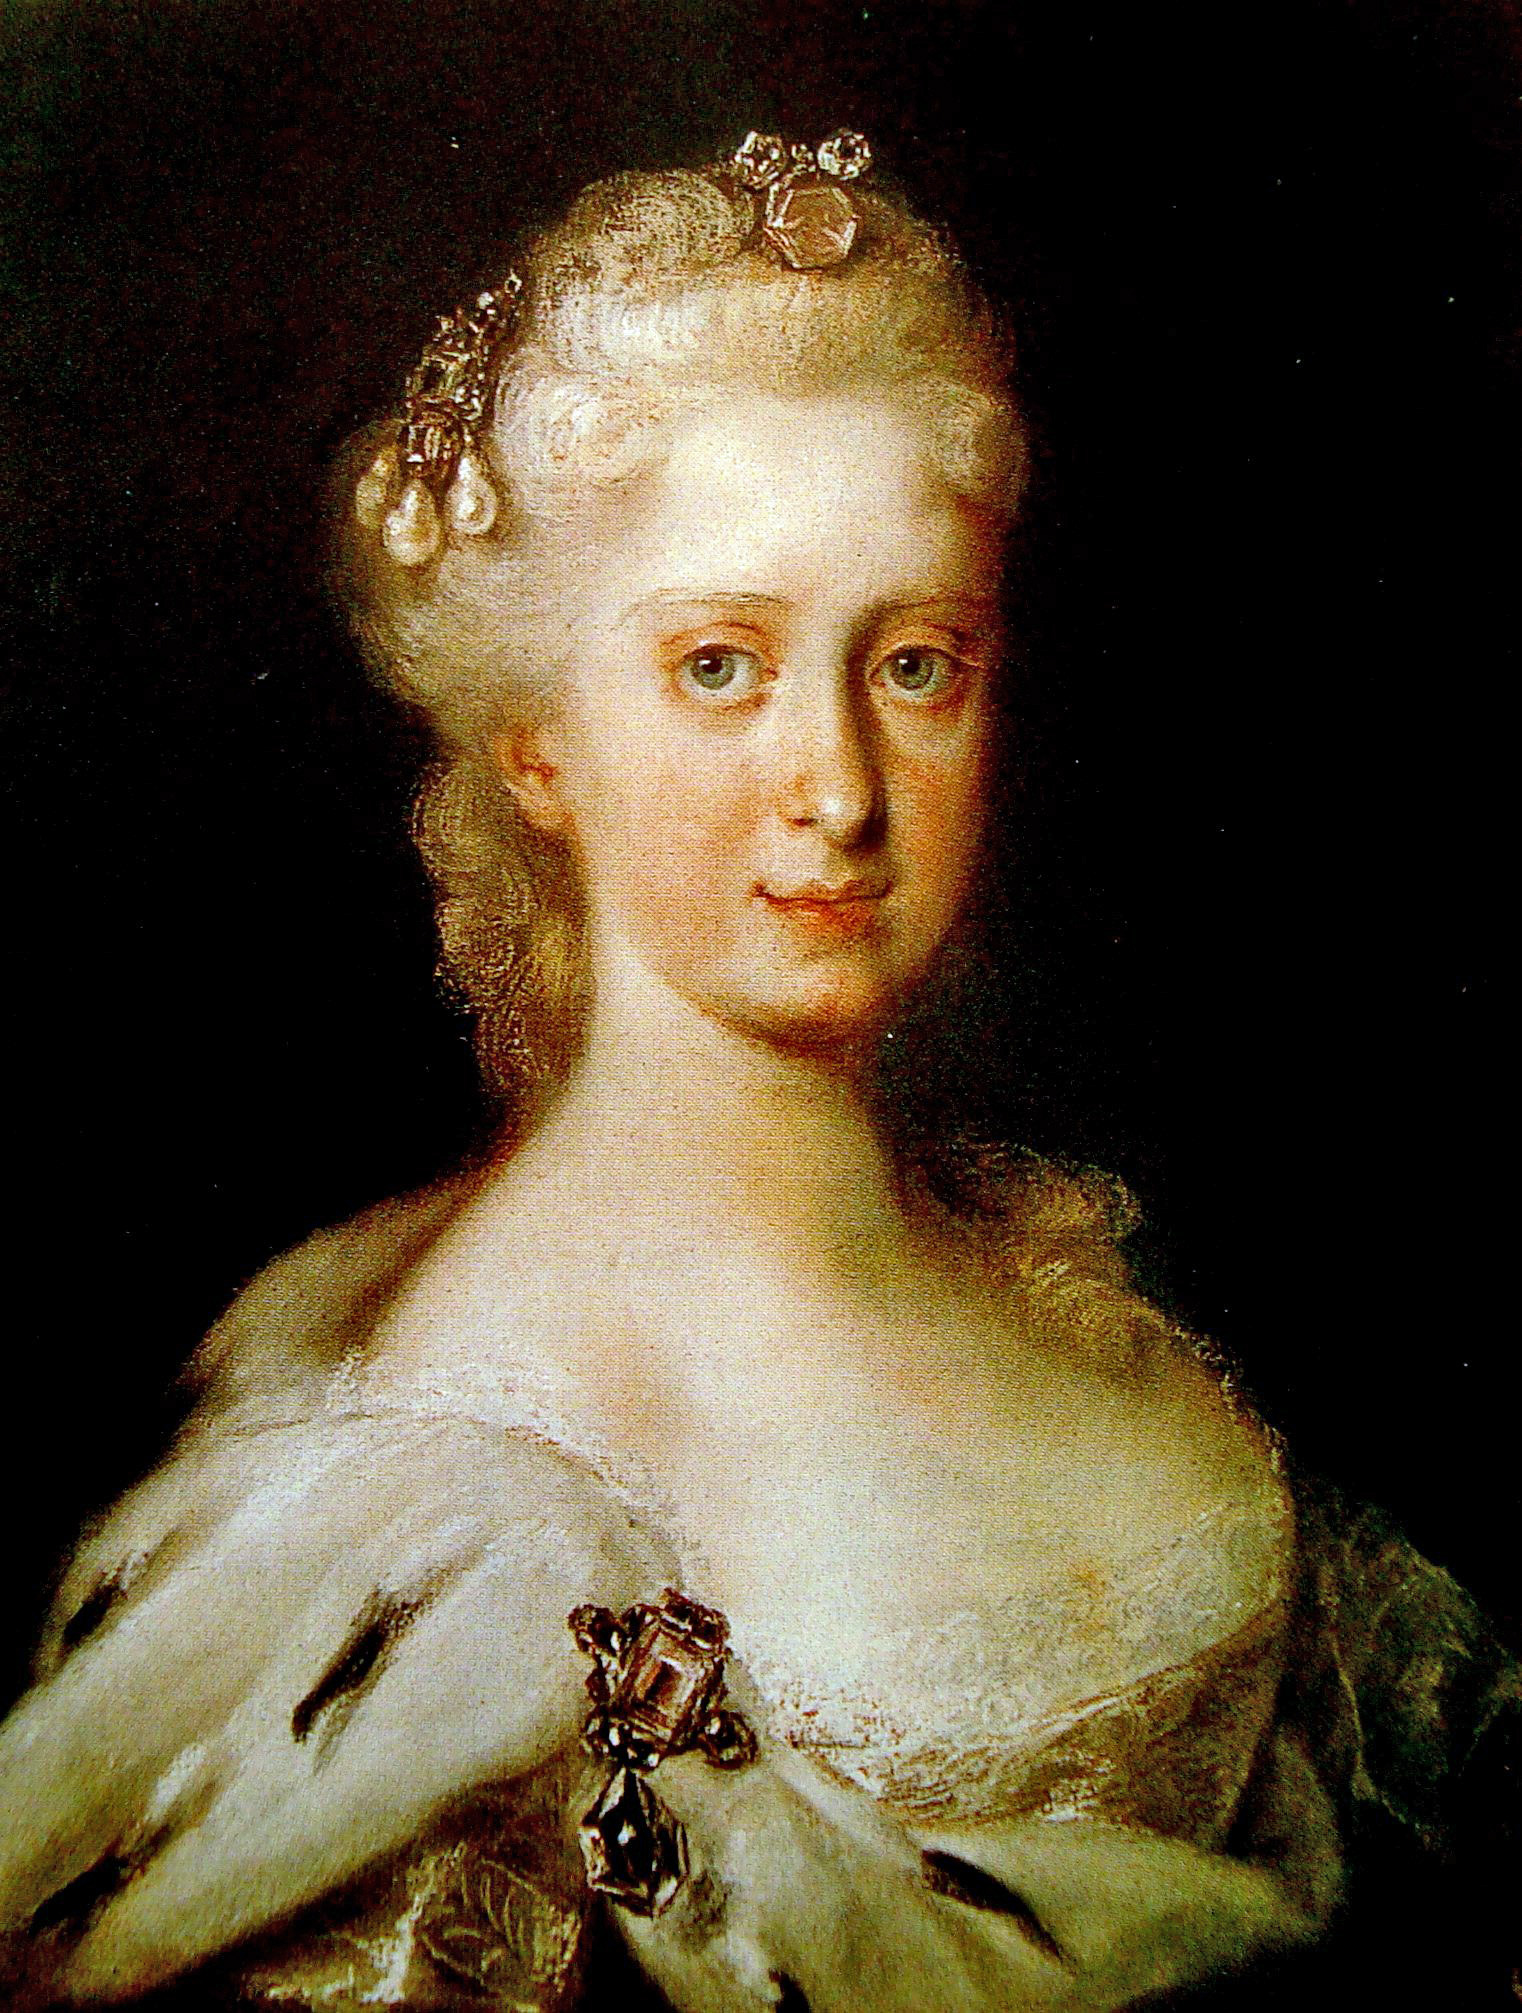 Maria Josepha, the dedicatee, in a 1720 painting by the Venetian rococo painter Rosalba Carriera.